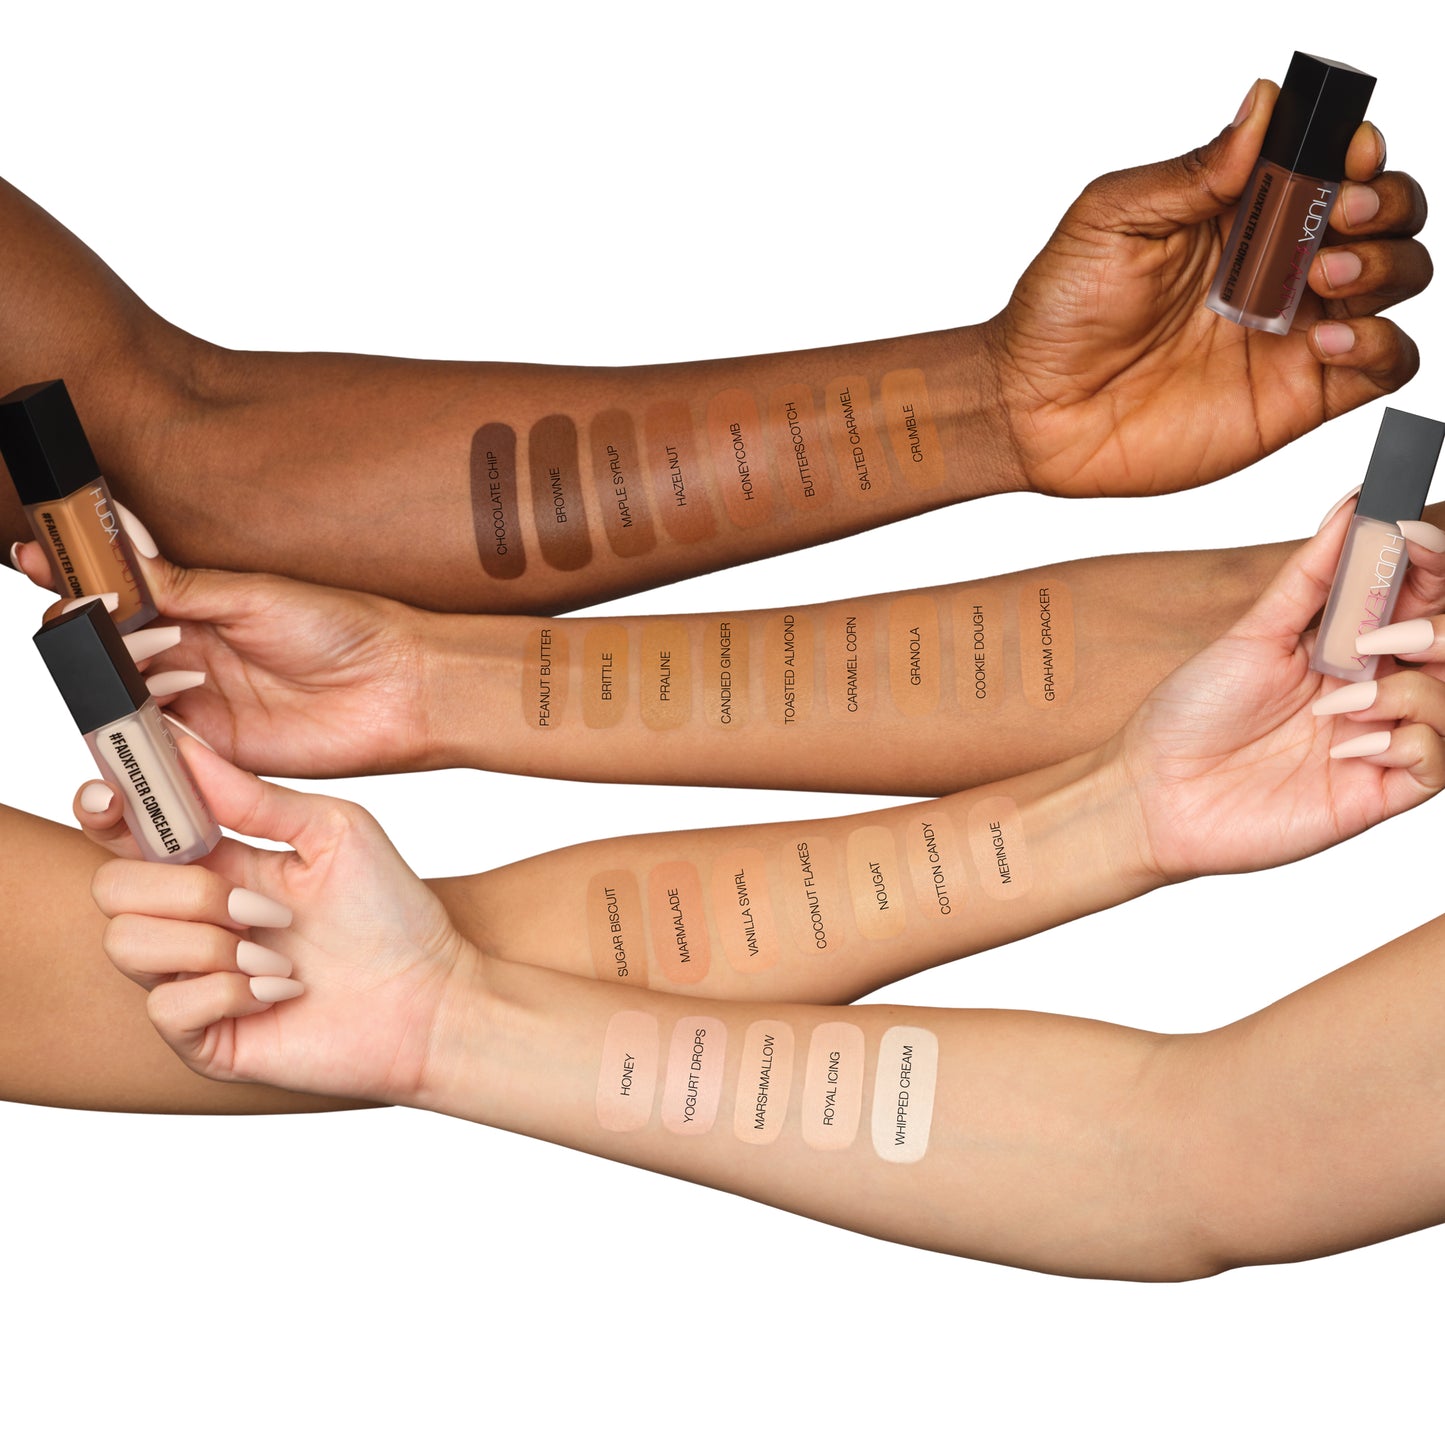 HUDA BEAUTY | #FauxFilter Luminous Matte Buildable Coverage Crease Proof Concealer